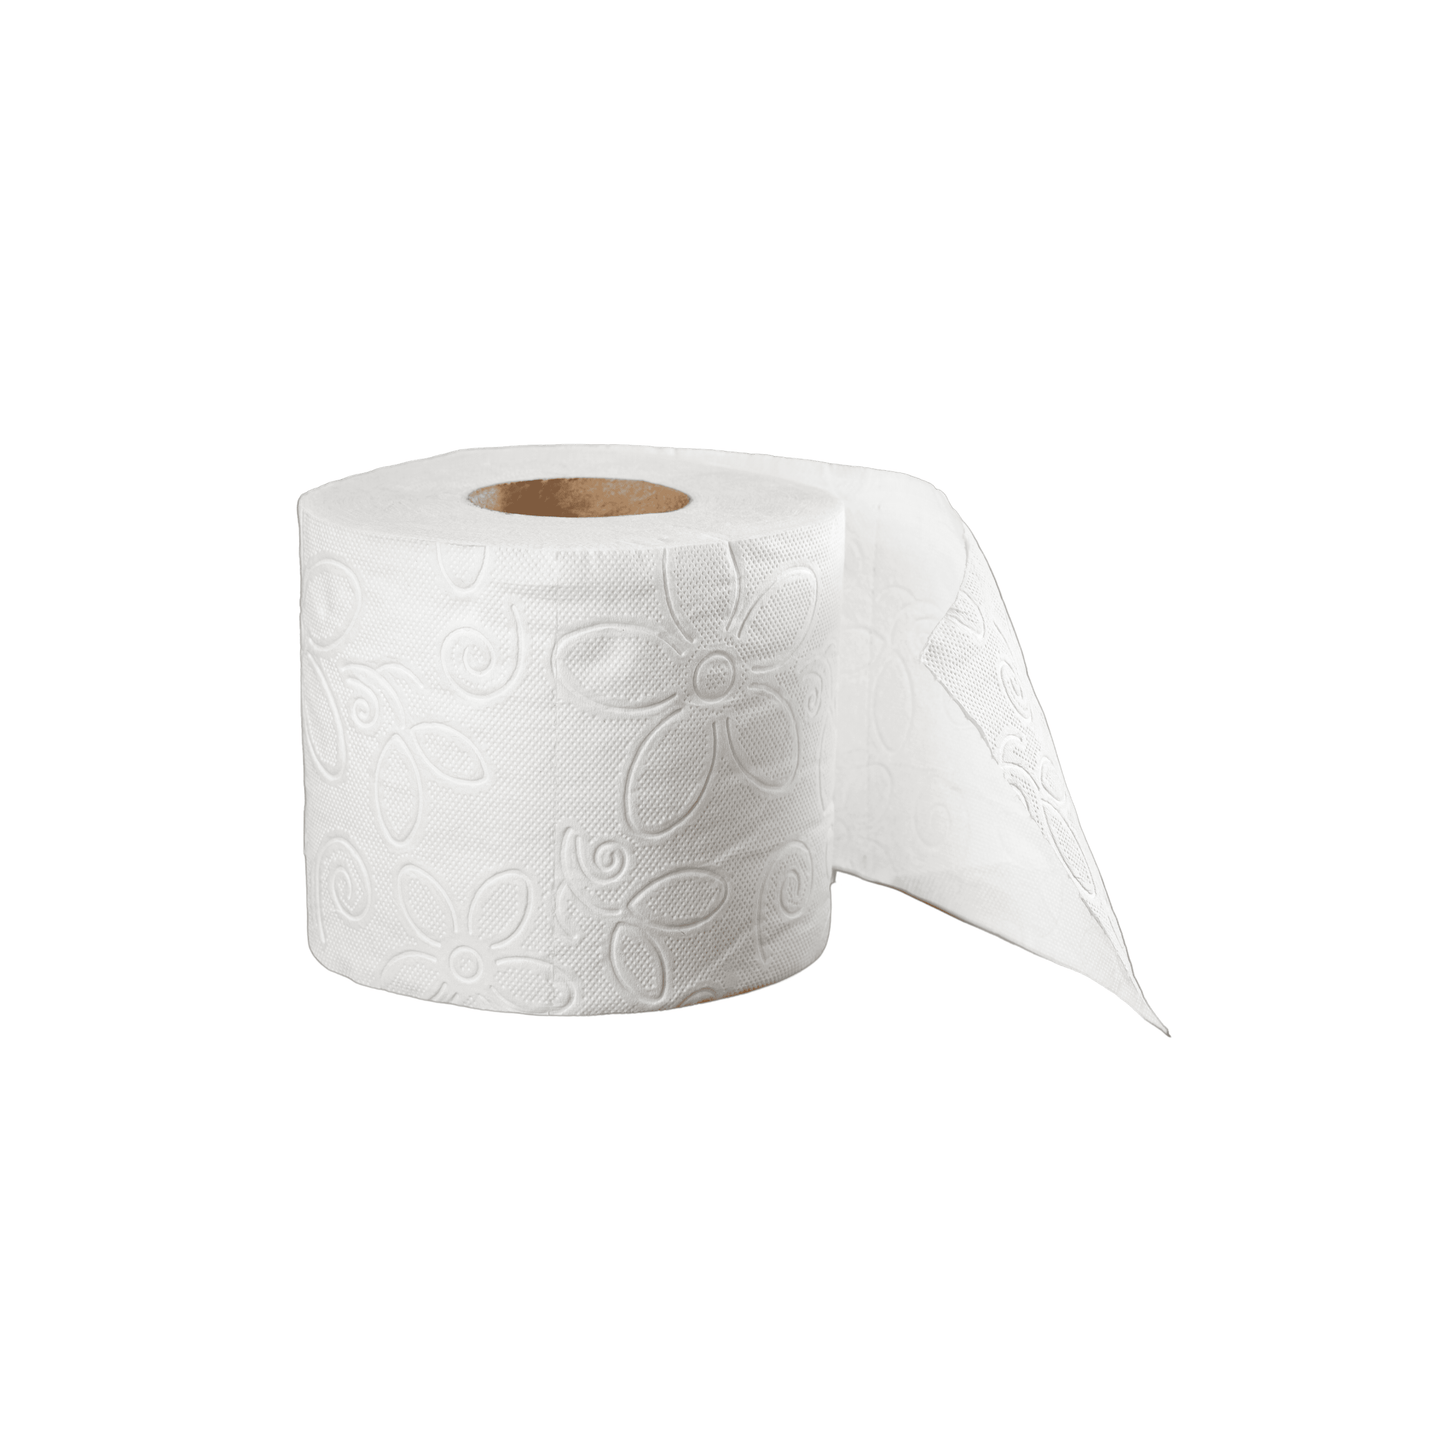 EJY IMPORT Toilet Paper Roll